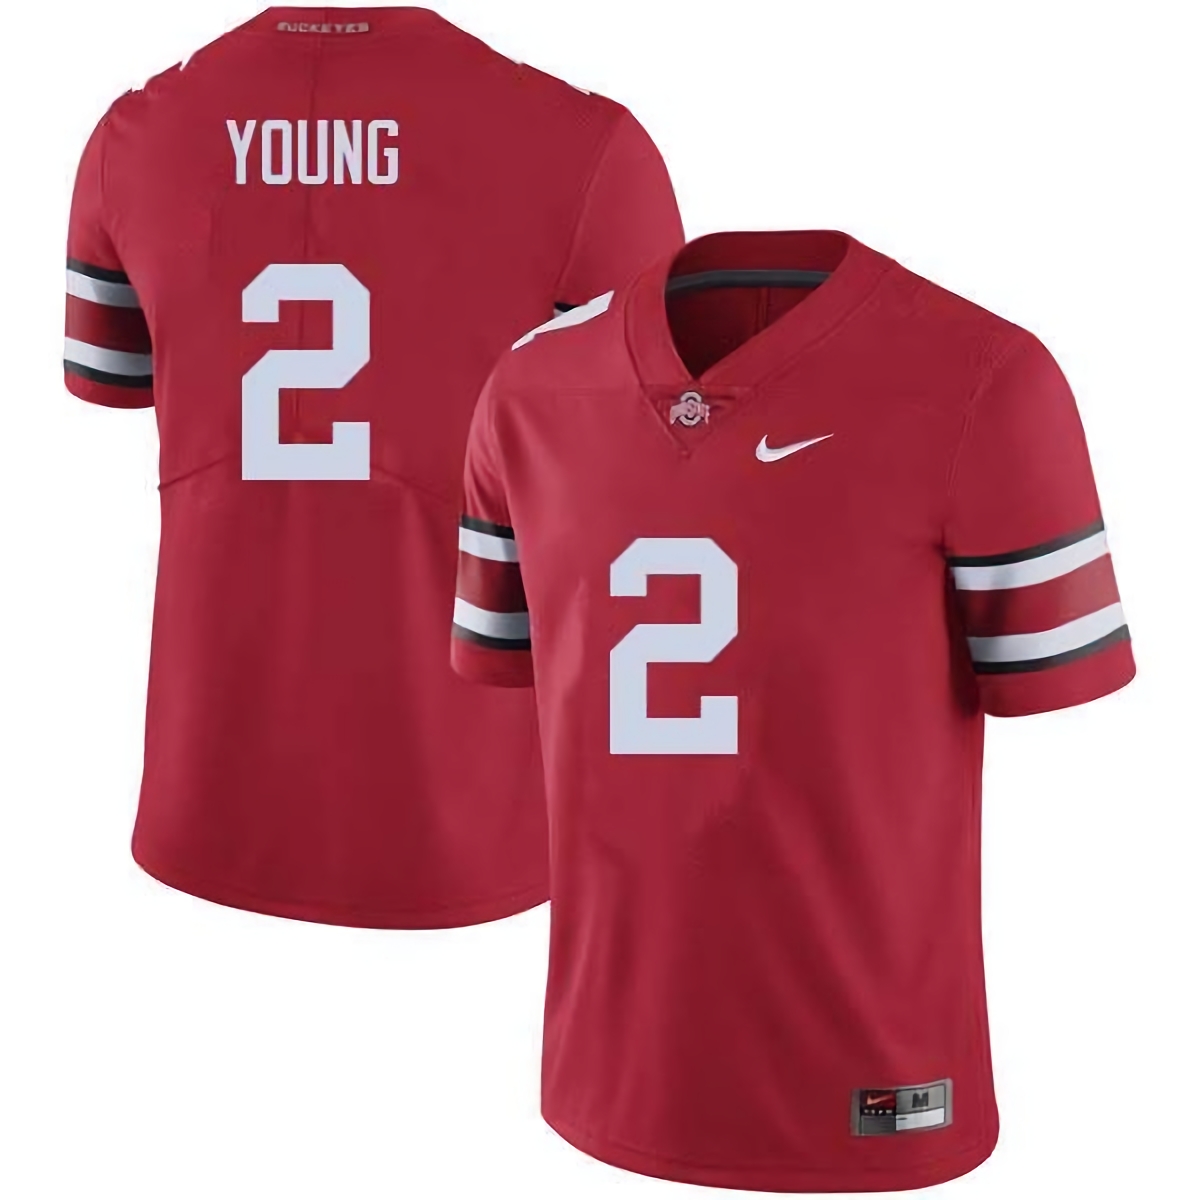 Chase Young Ohio State Buckeyes Men's NCAA #2 Nike Red College Stitched Football Jersey RST0456ZL